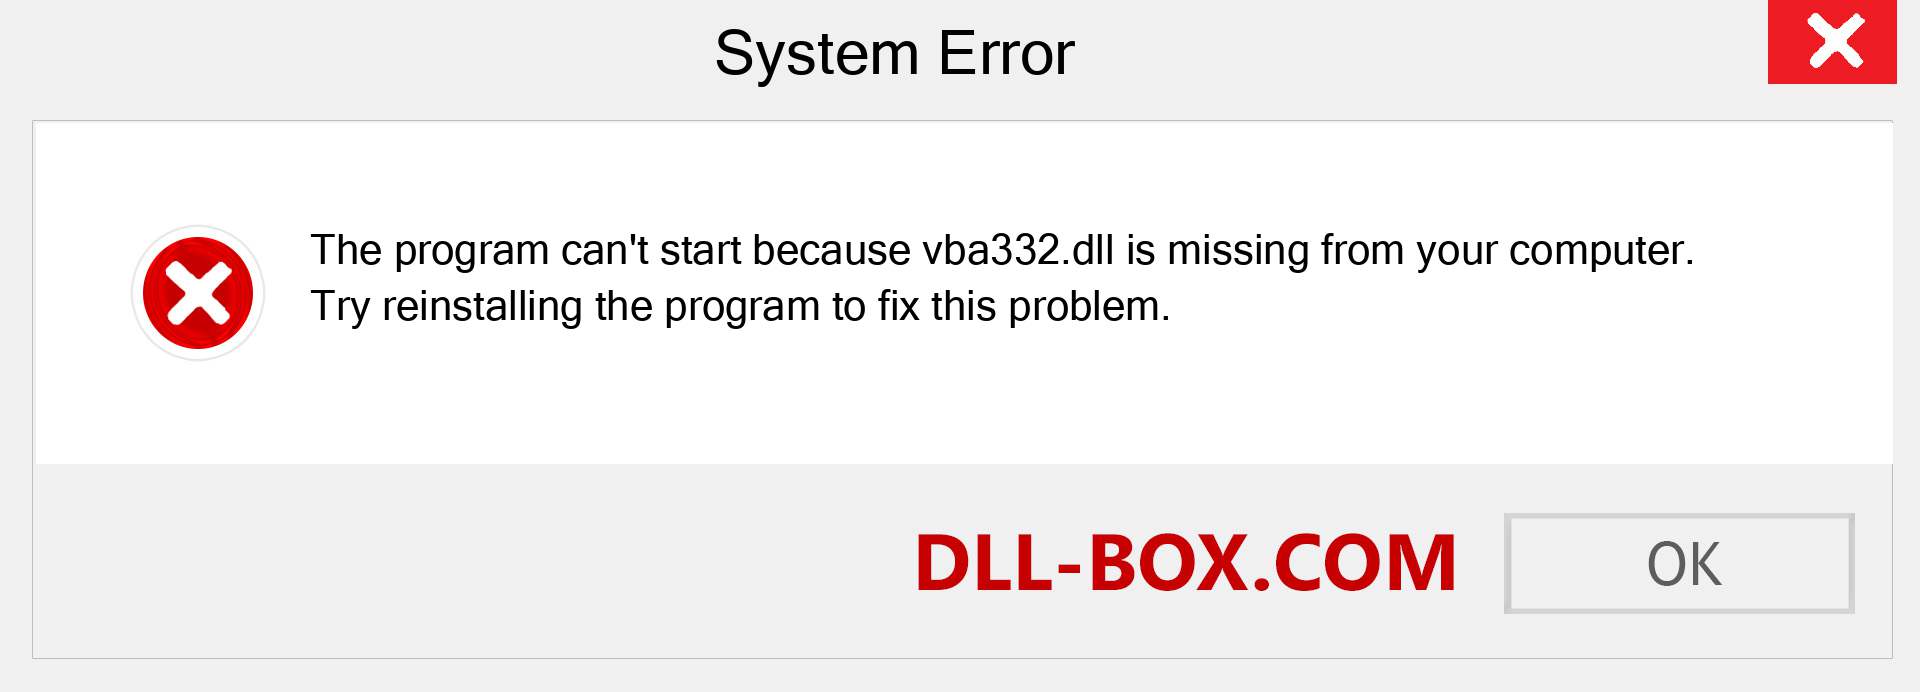  vba332.dll file is missing?. Download for Windows 7, 8, 10 - Fix  vba332 dll Missing Error on Windows, photos, images